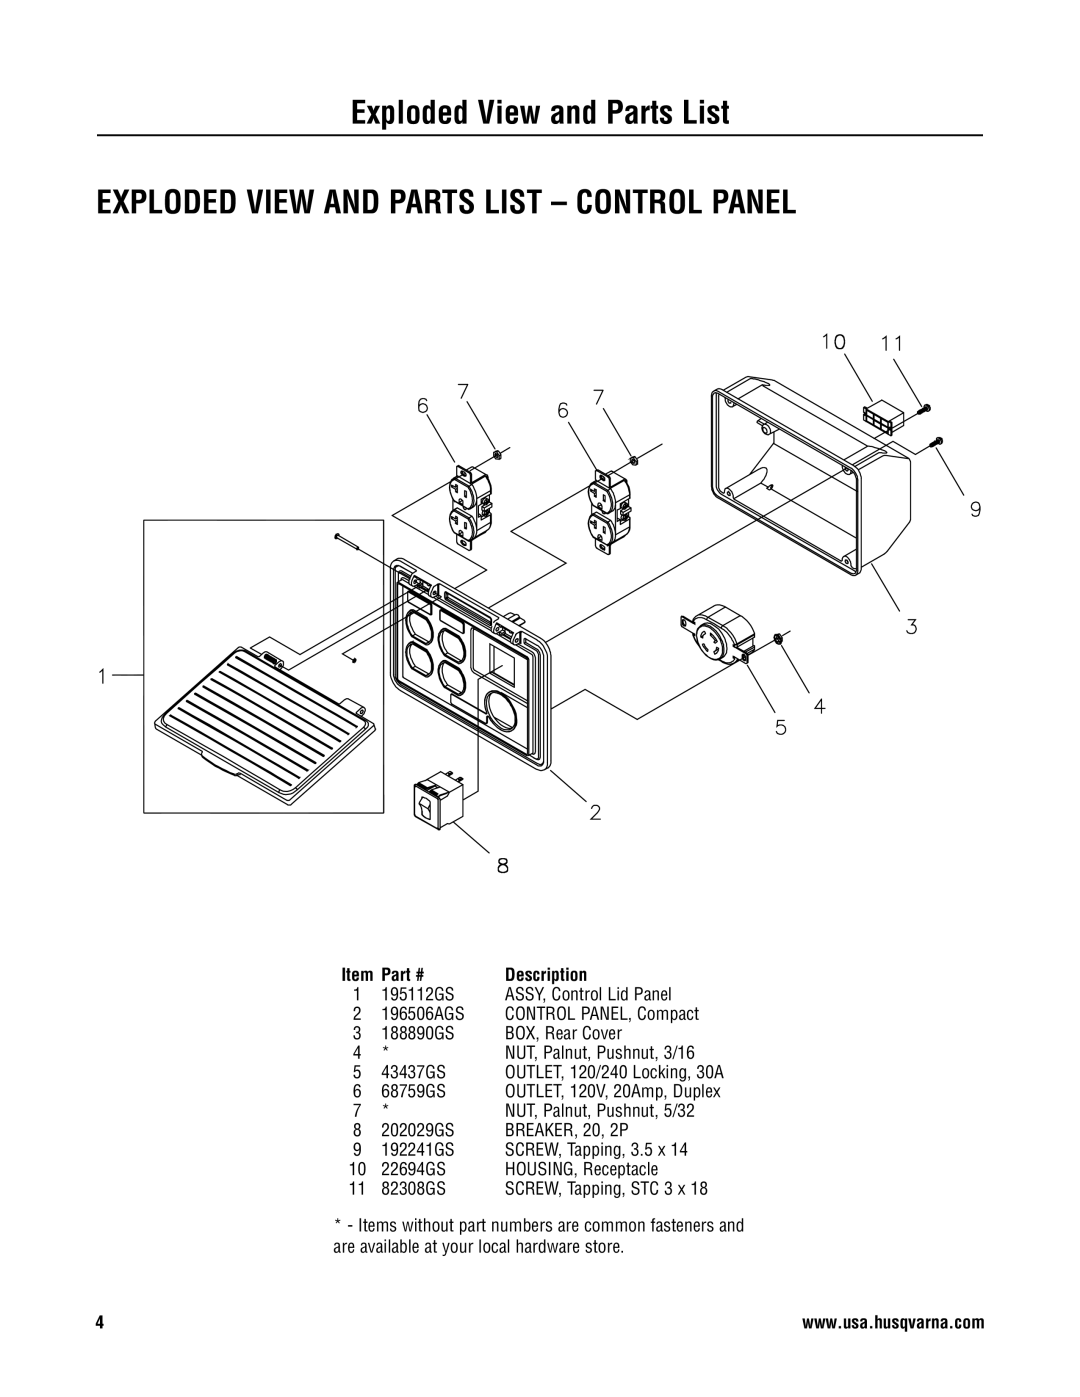 Husqvarna 1055 GN manual Exploded View and Parts List, Exploded View And Parts List - Control Panel, Description 